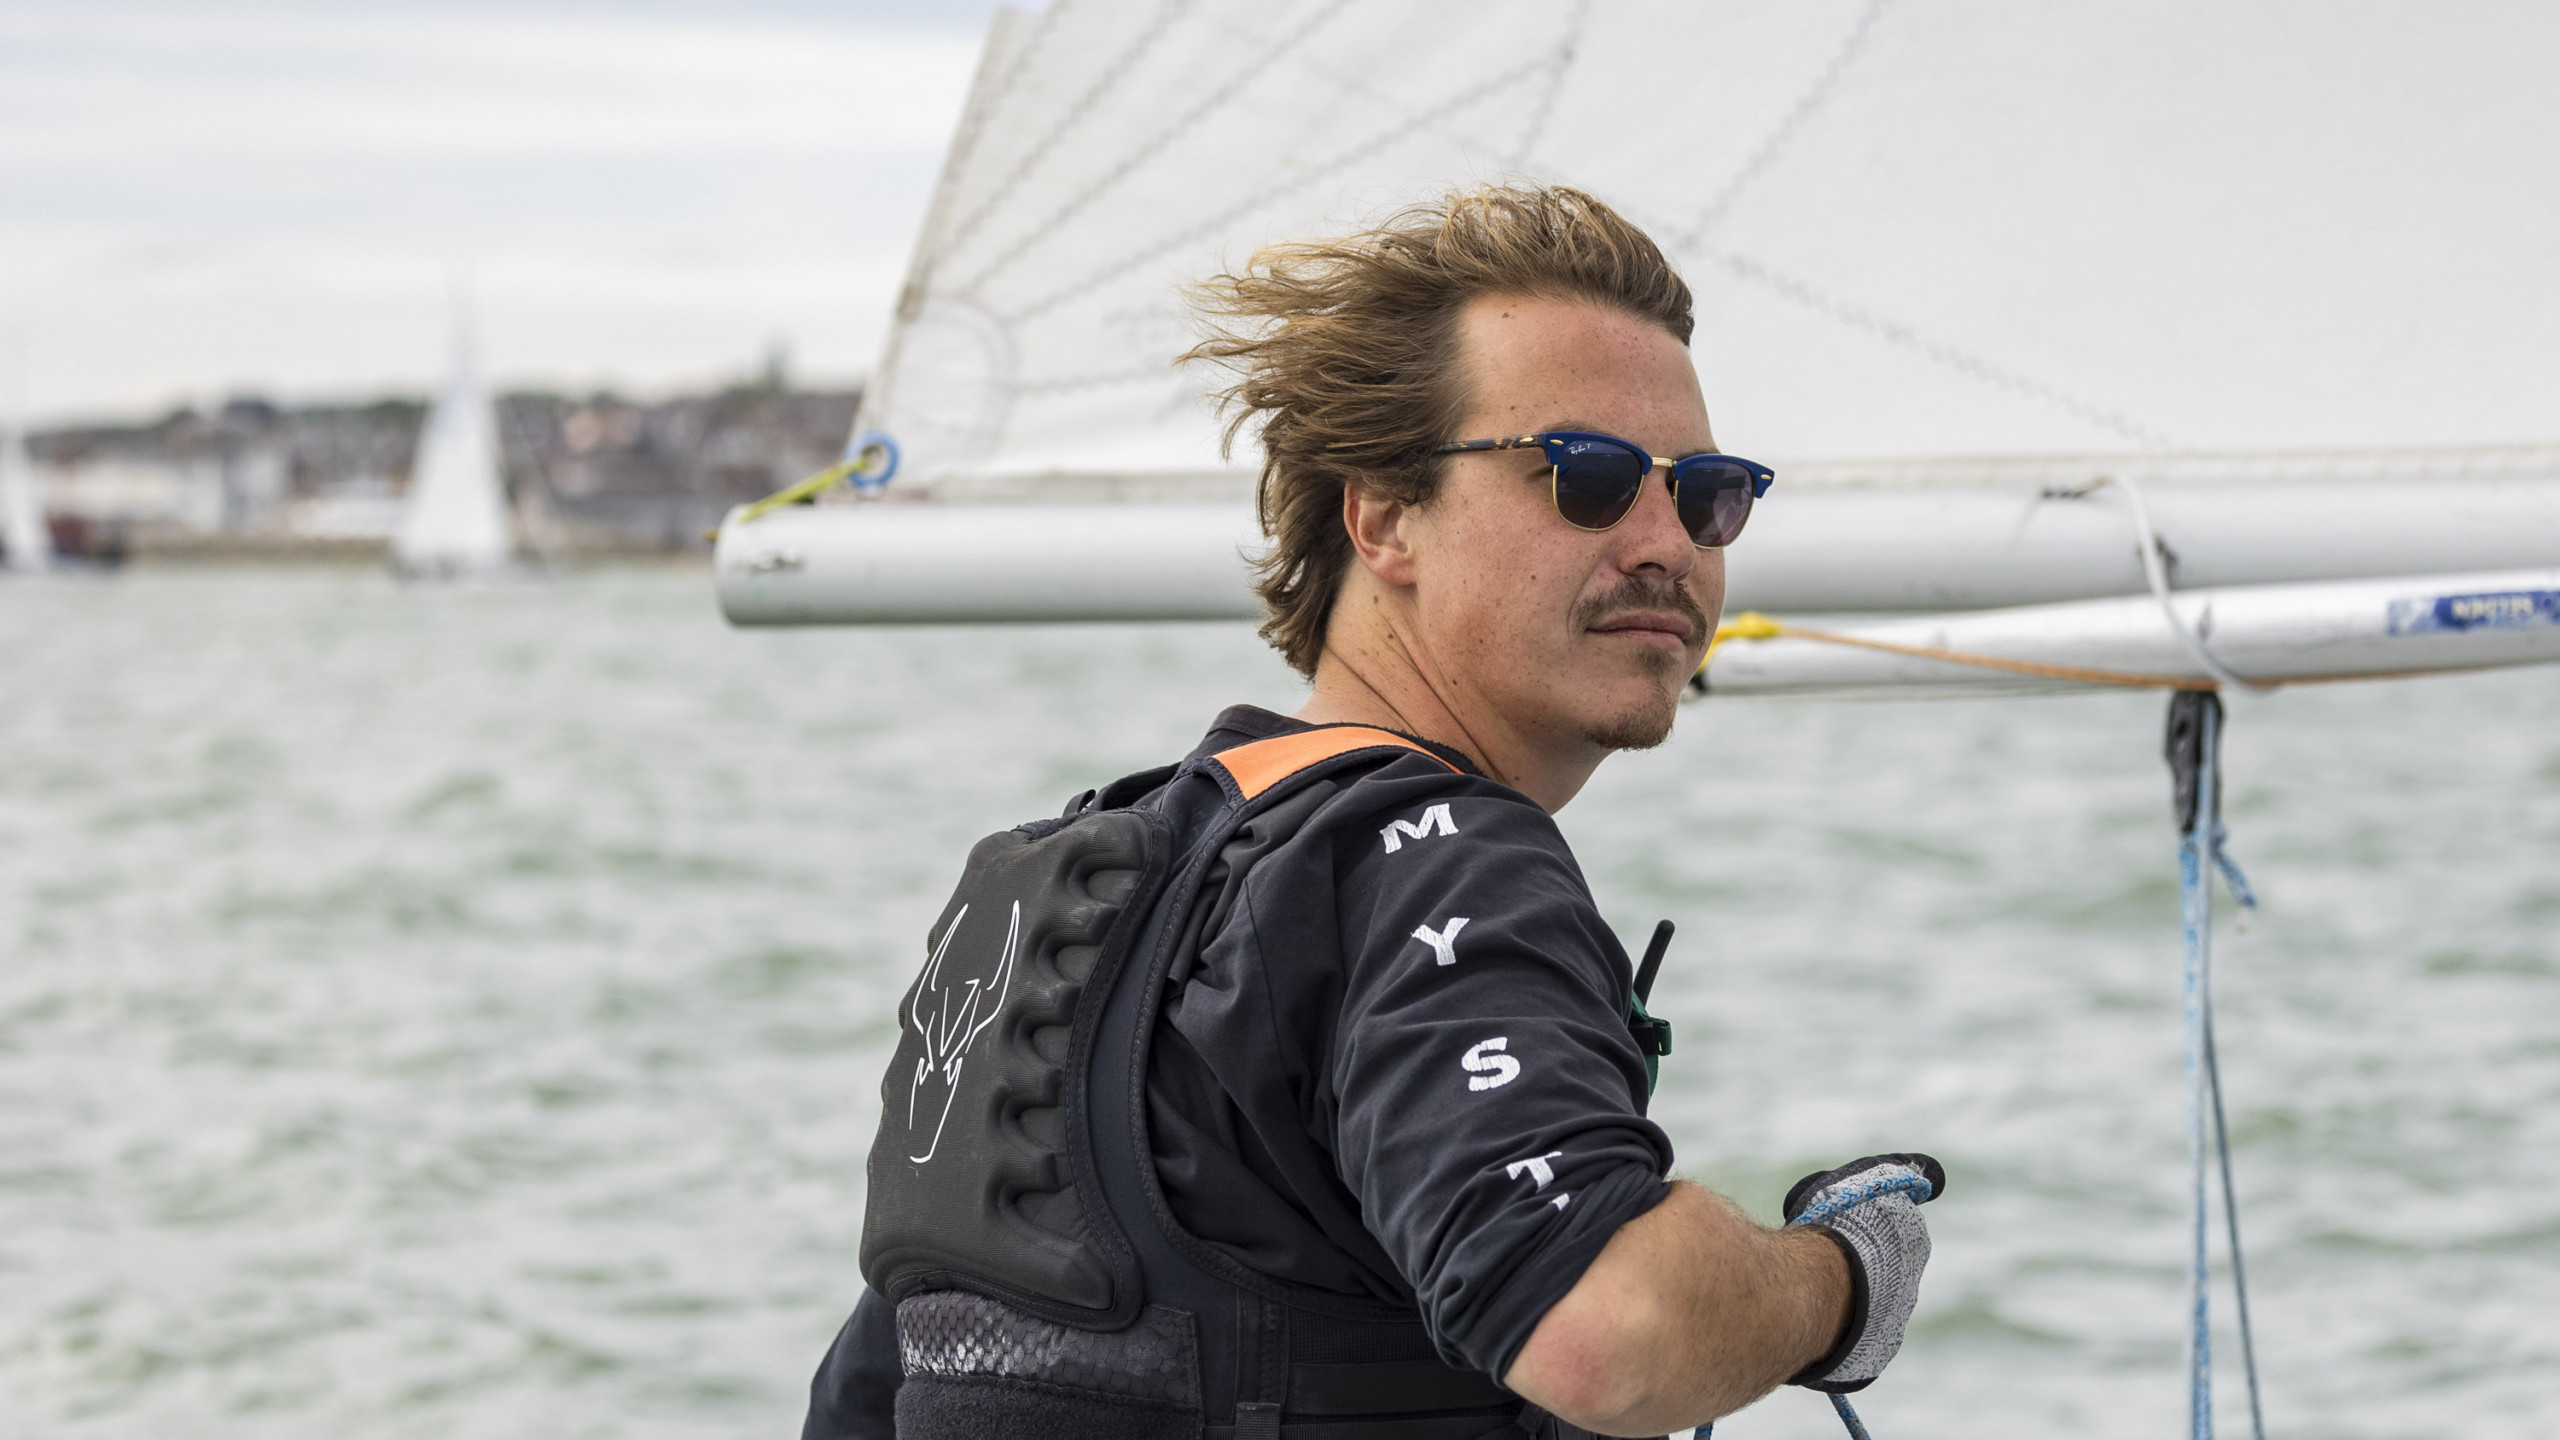 A man is sailing a racing keelboat on a grey sea. He is concentrating intently looking to the right of the camera